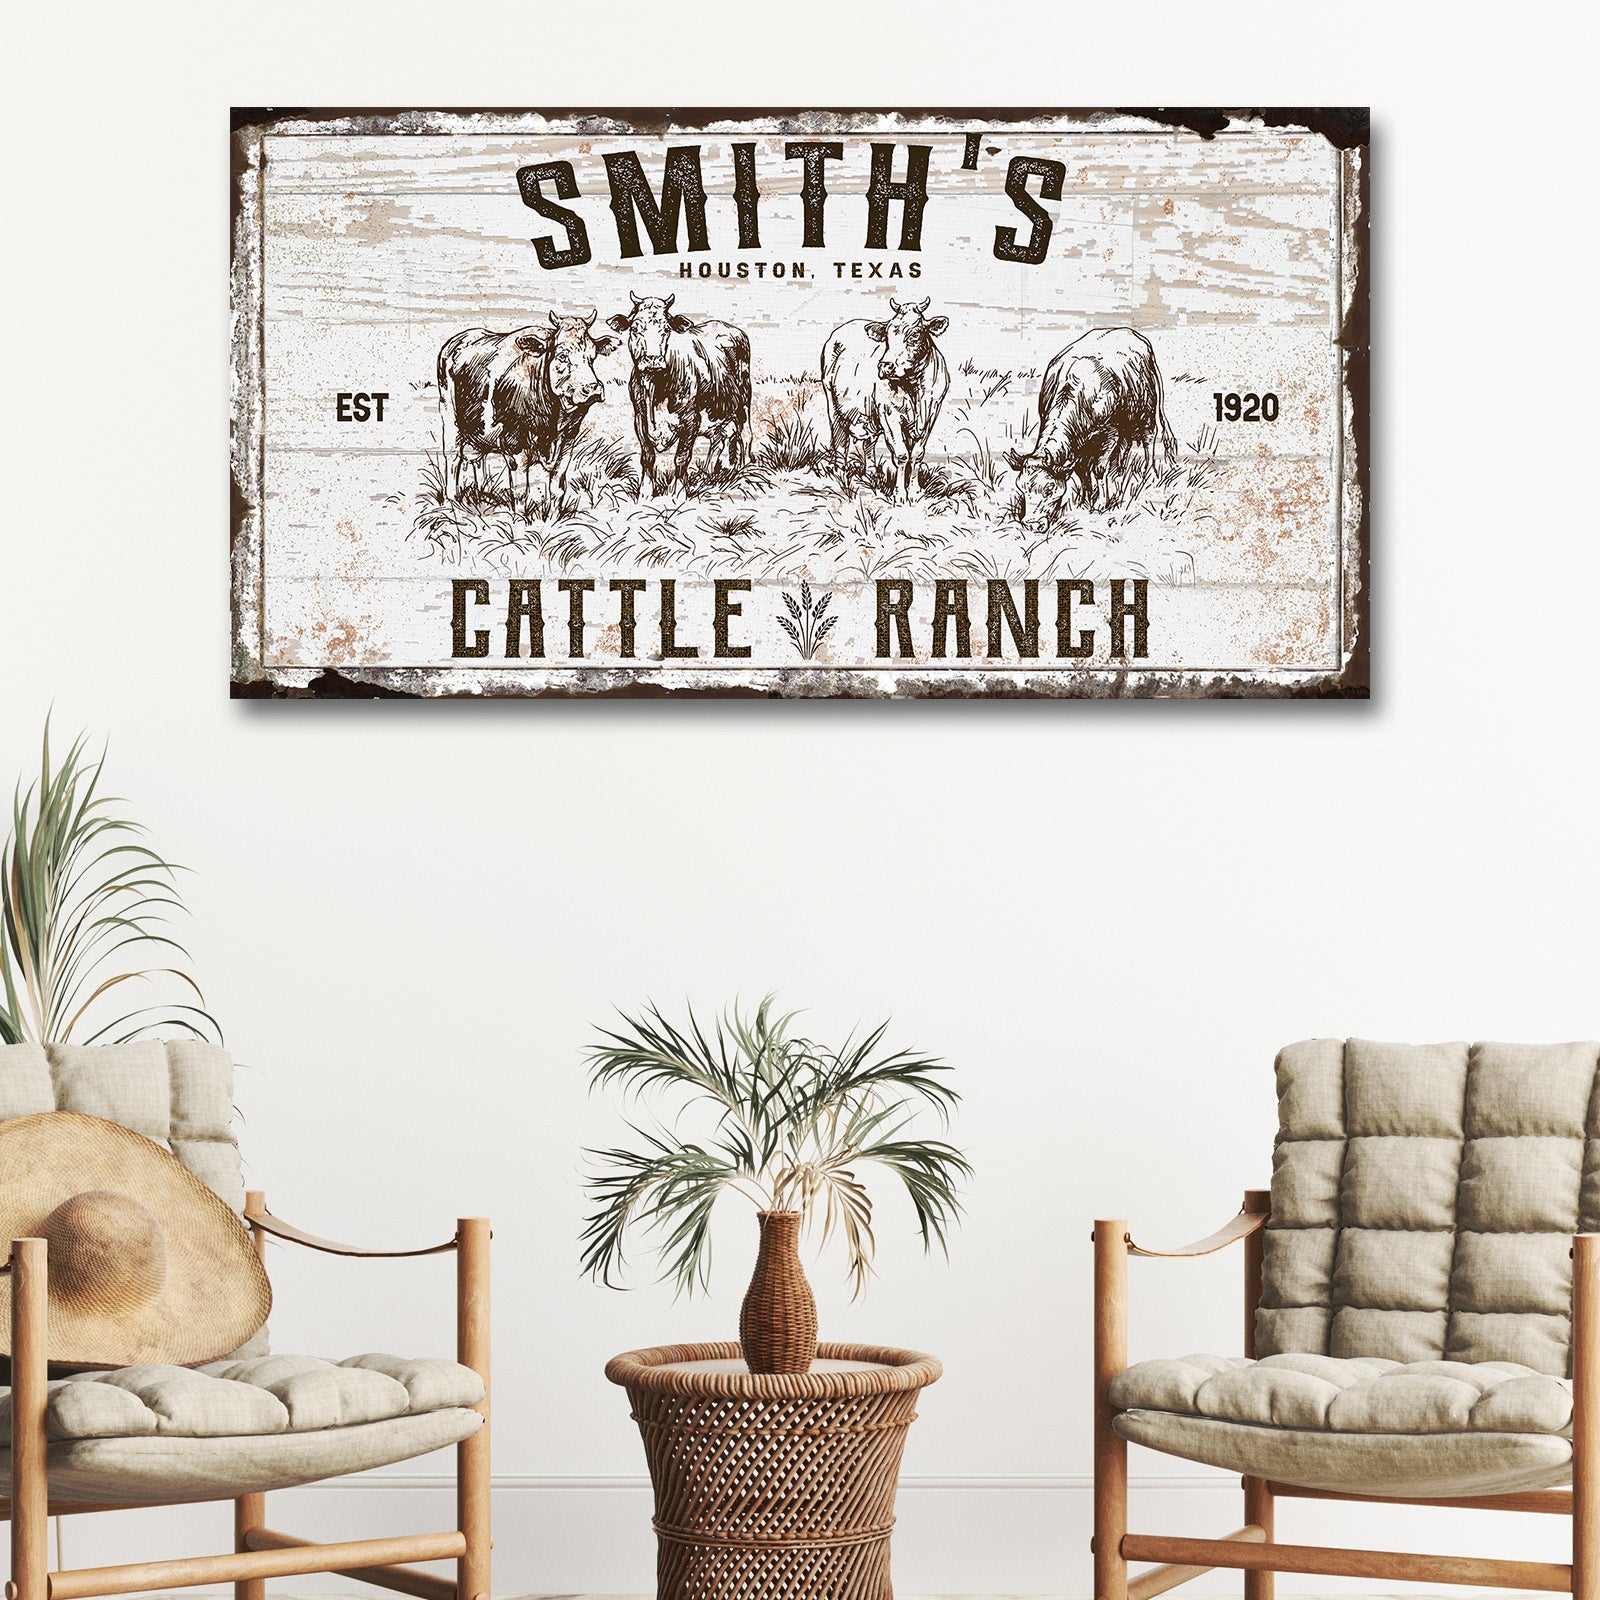 CATTLE RANCH PRINT Sign - Image by Tailored Canvases